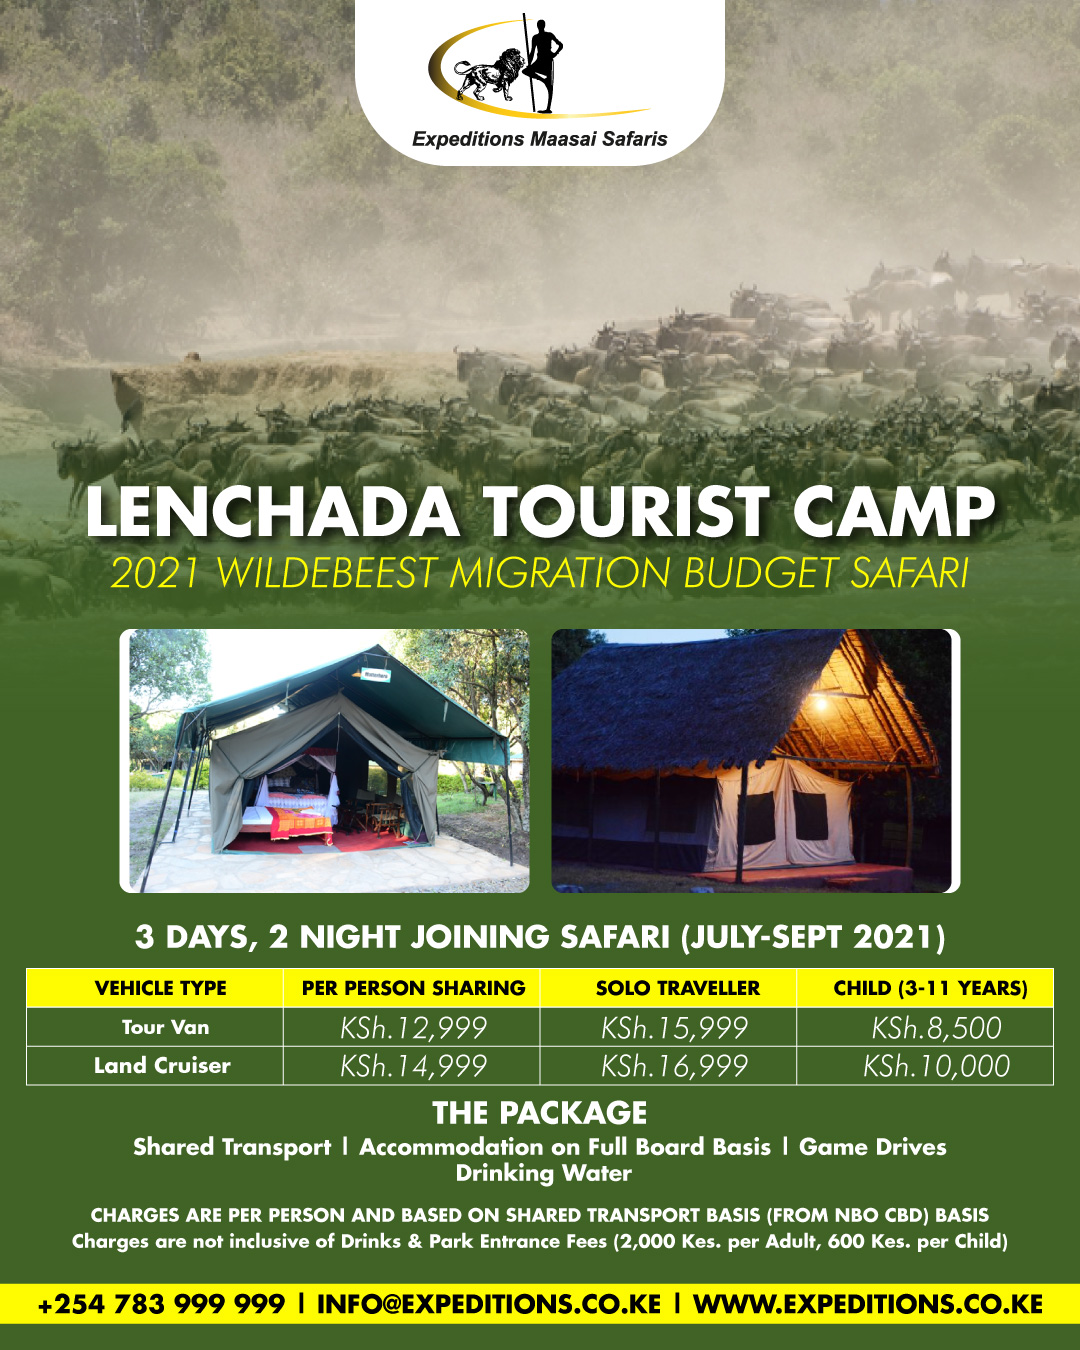 Are you seeking to witness the wildebeest migration but on a budget? Join us for a 3 days joining safari to Lenchada Tourist Camp